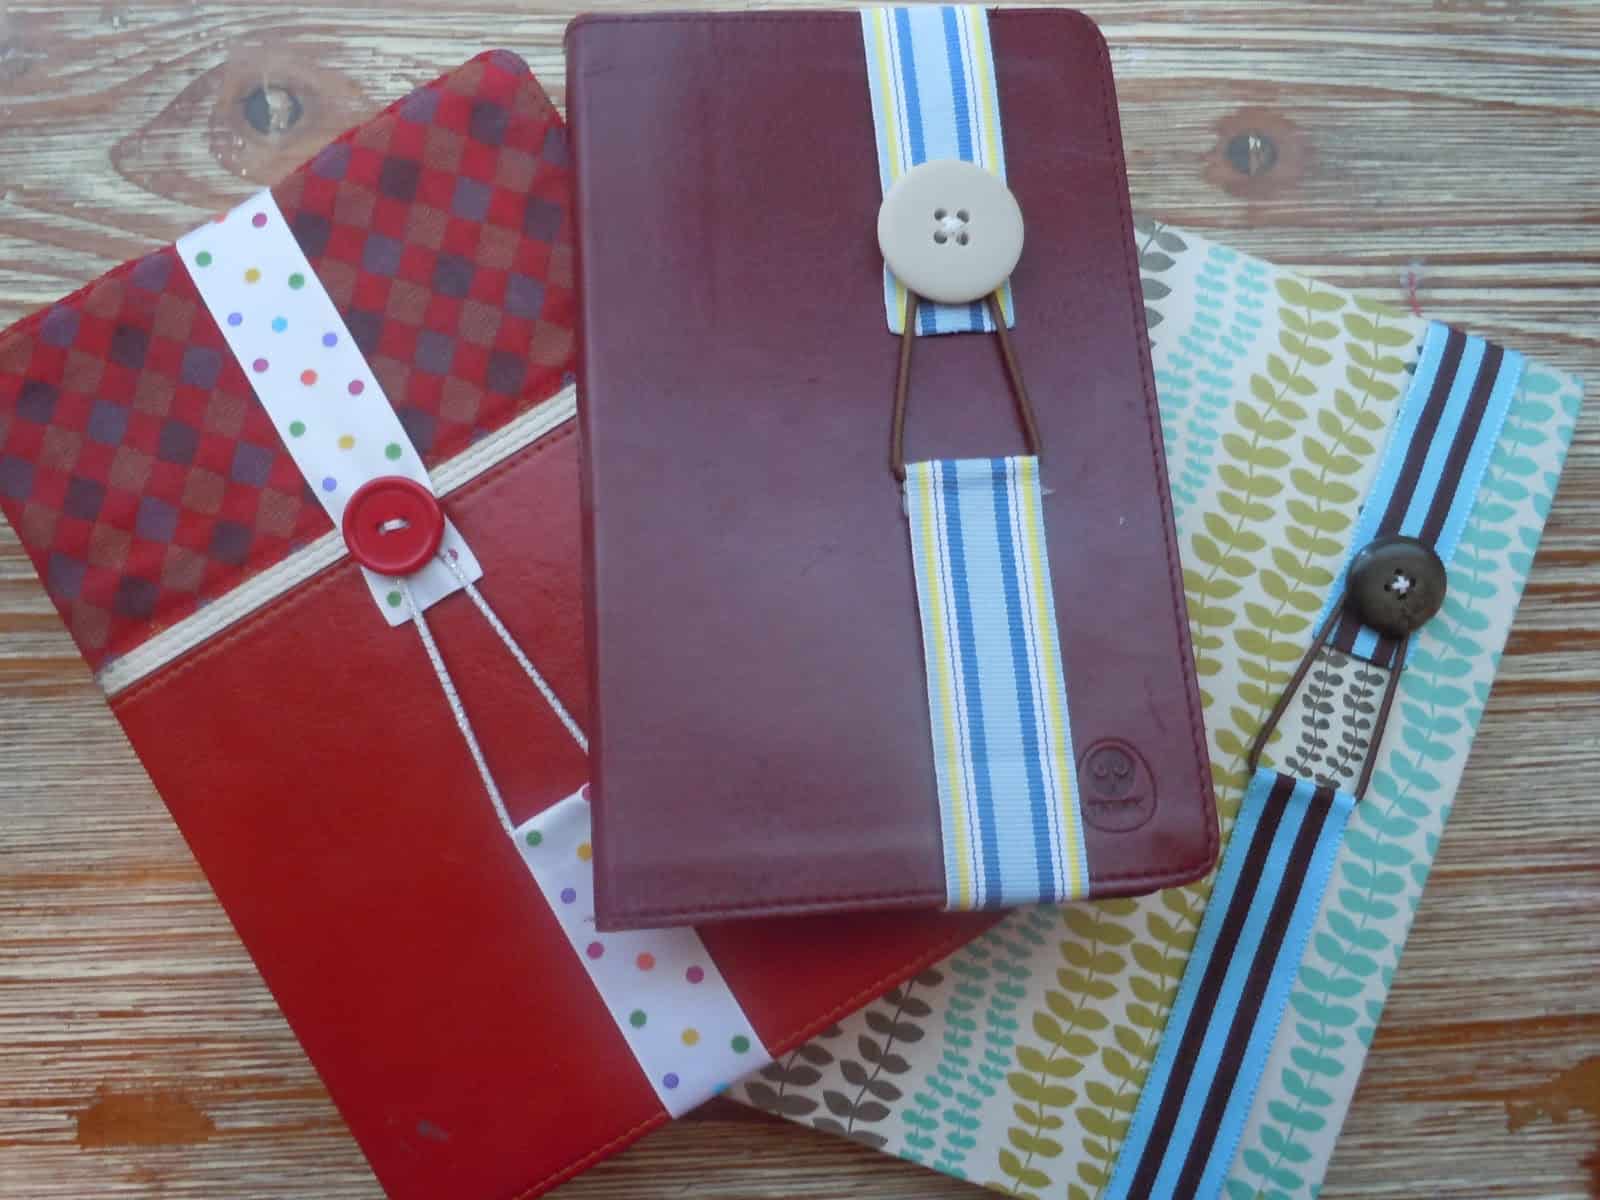 Ribbon, elastic, and button bookmarks